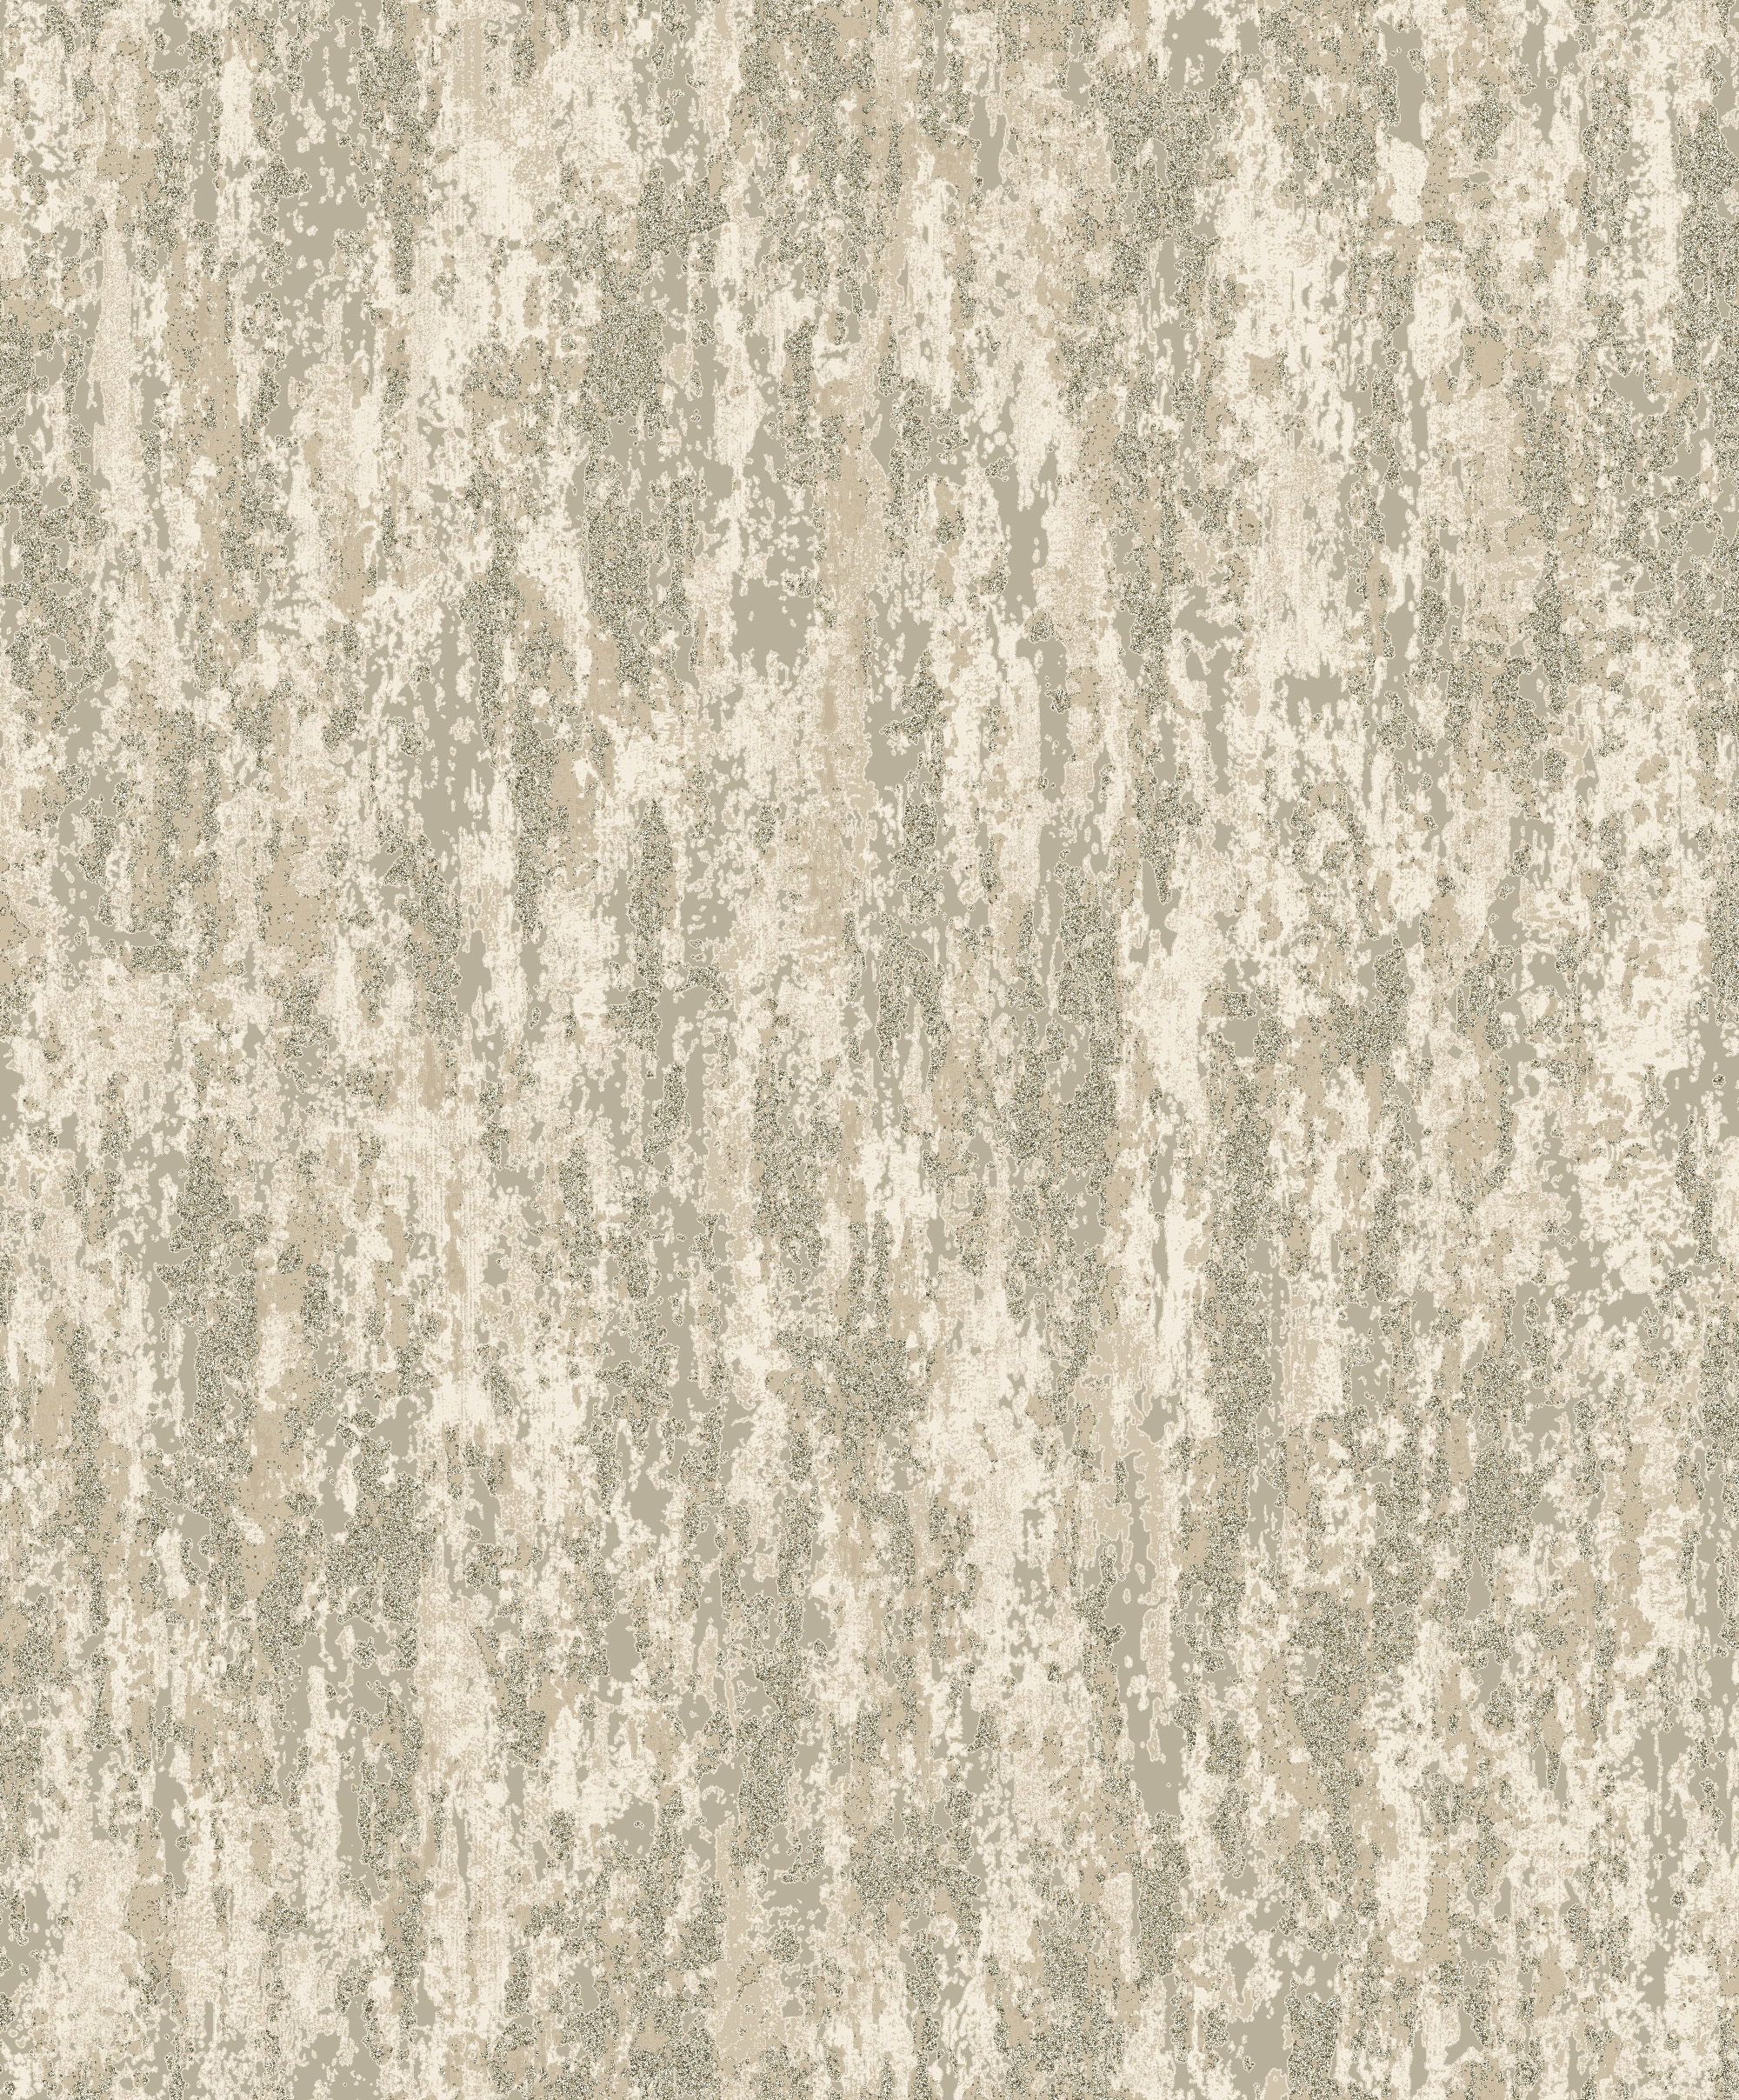 Image of Holden Decor Enigma Bead Taupe Wallpaper - 10.05m x 53cm